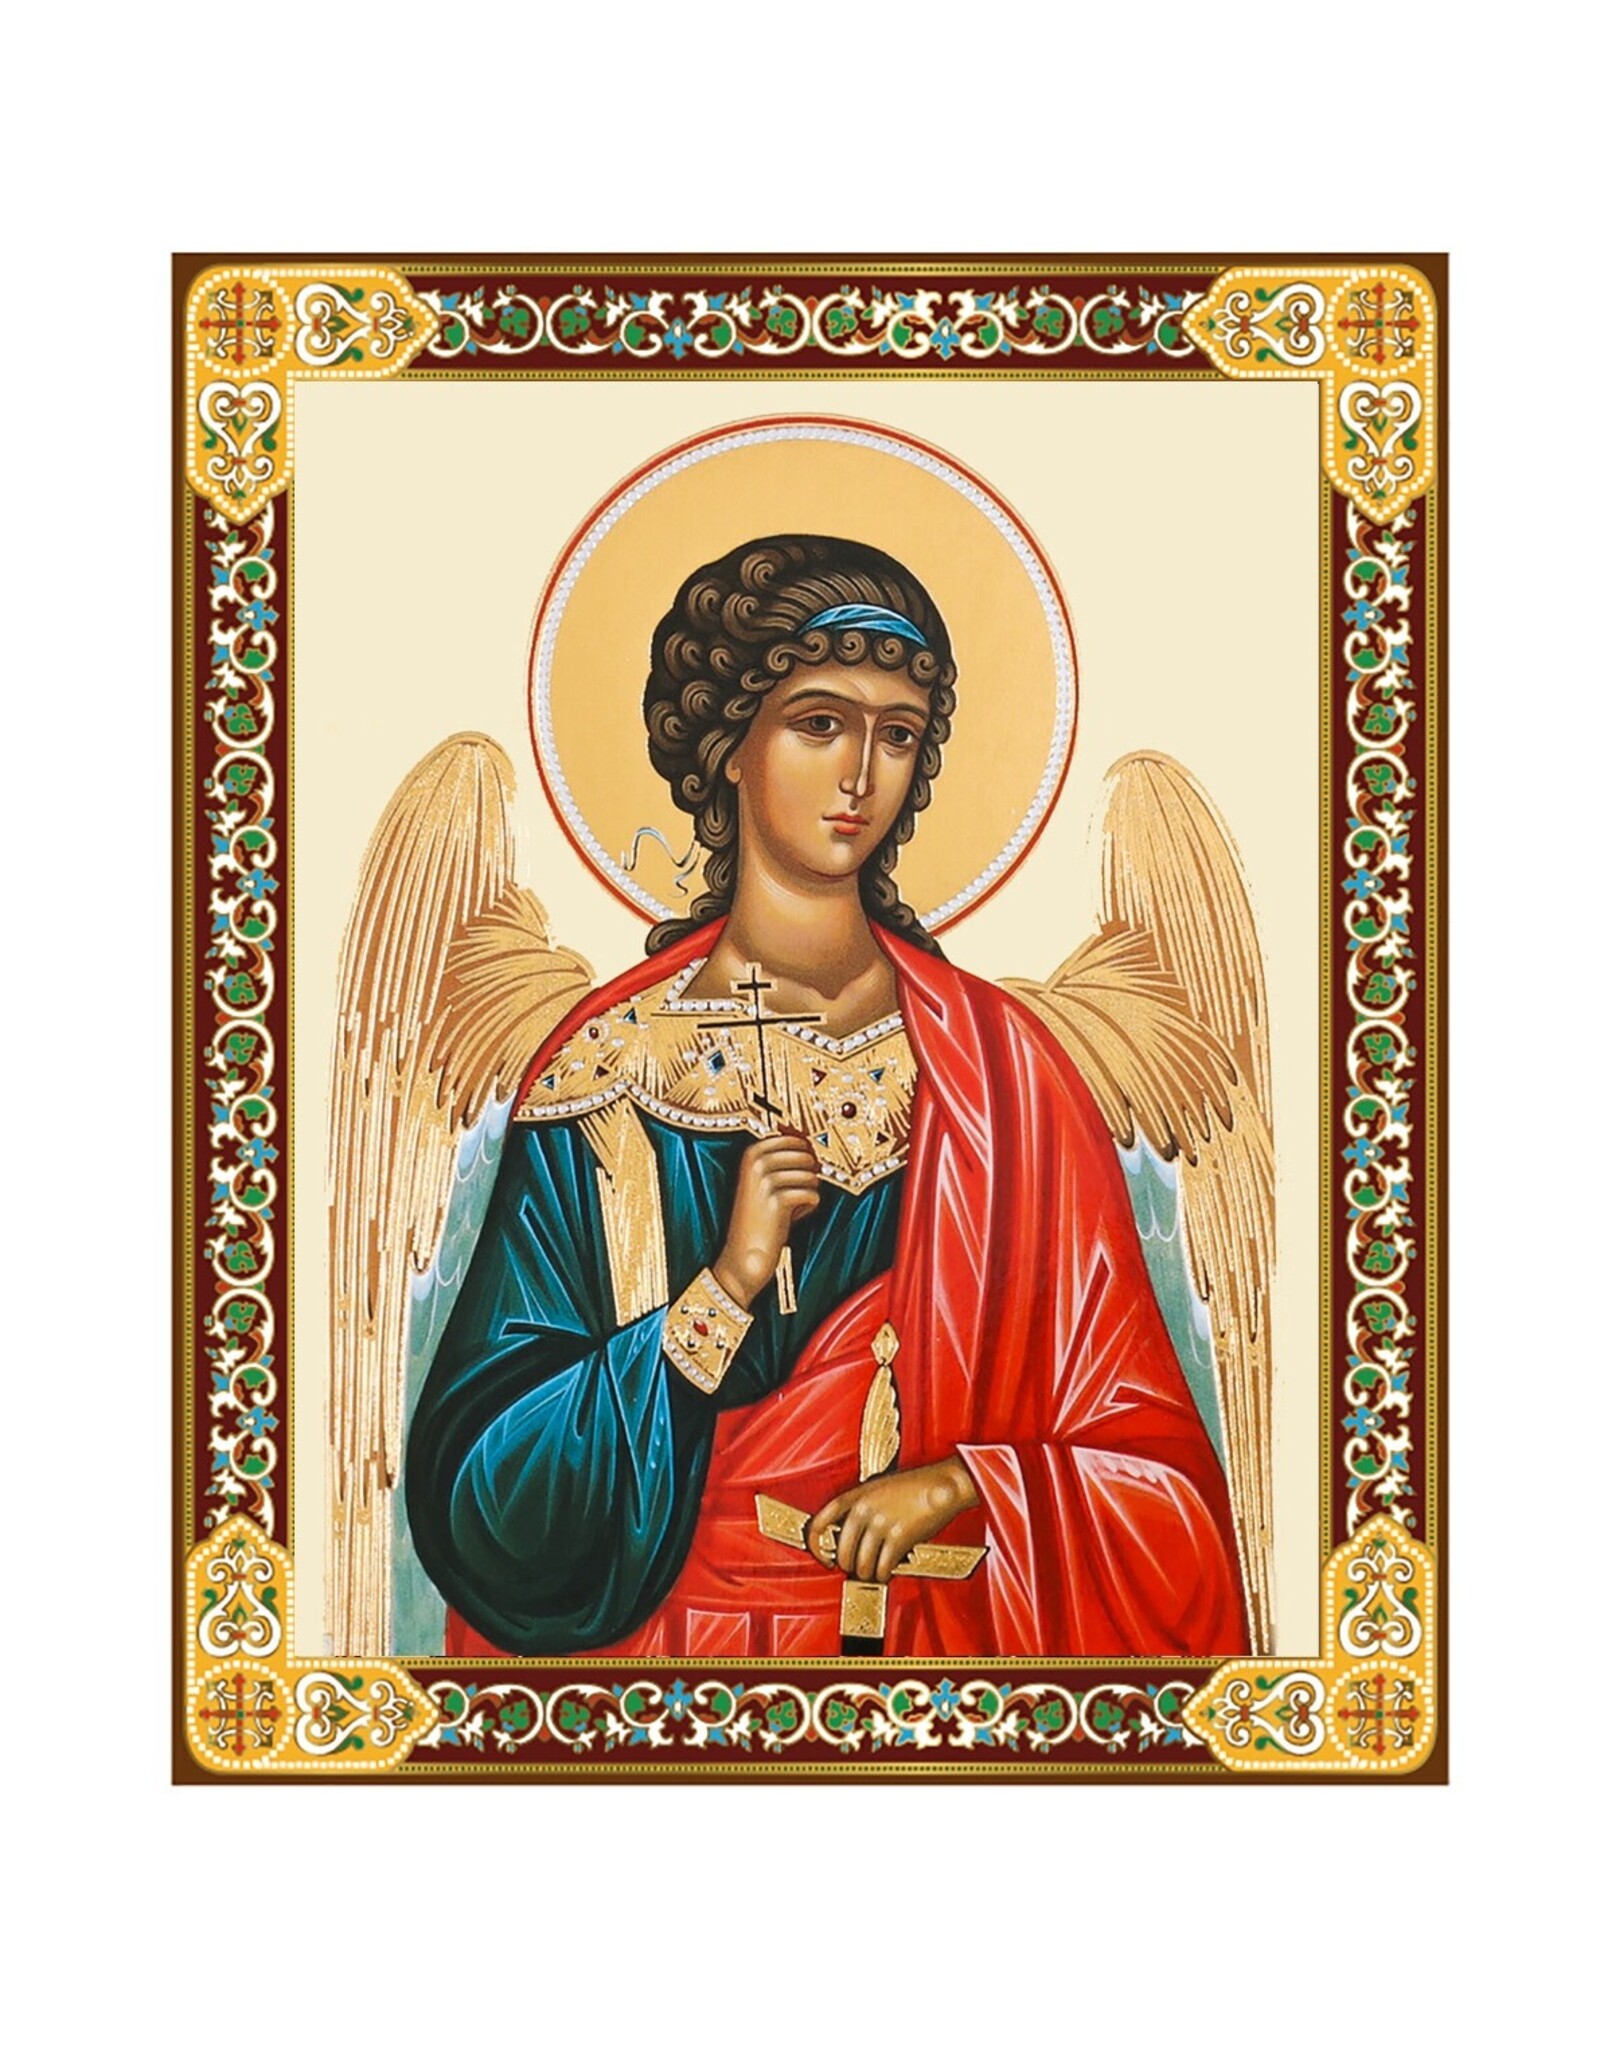 Guardian Angel Gold Foil Wooden  Small Icon